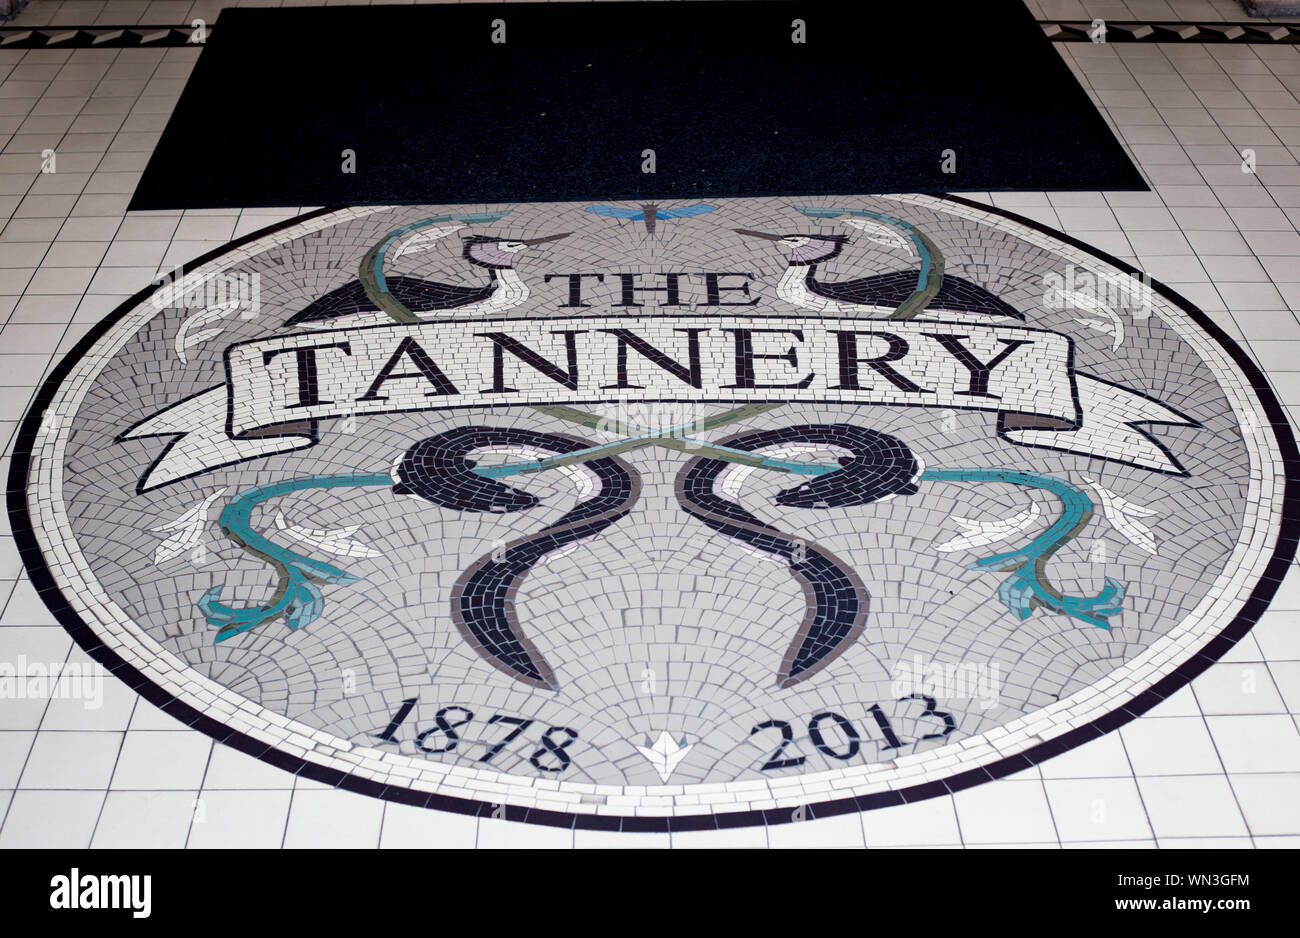 Woolston, Christchurch, New Zealand, September 2 2019: The mosaic floor tiles at one of the entrance doors to The Tannery boutique shopping centre Stock Photo